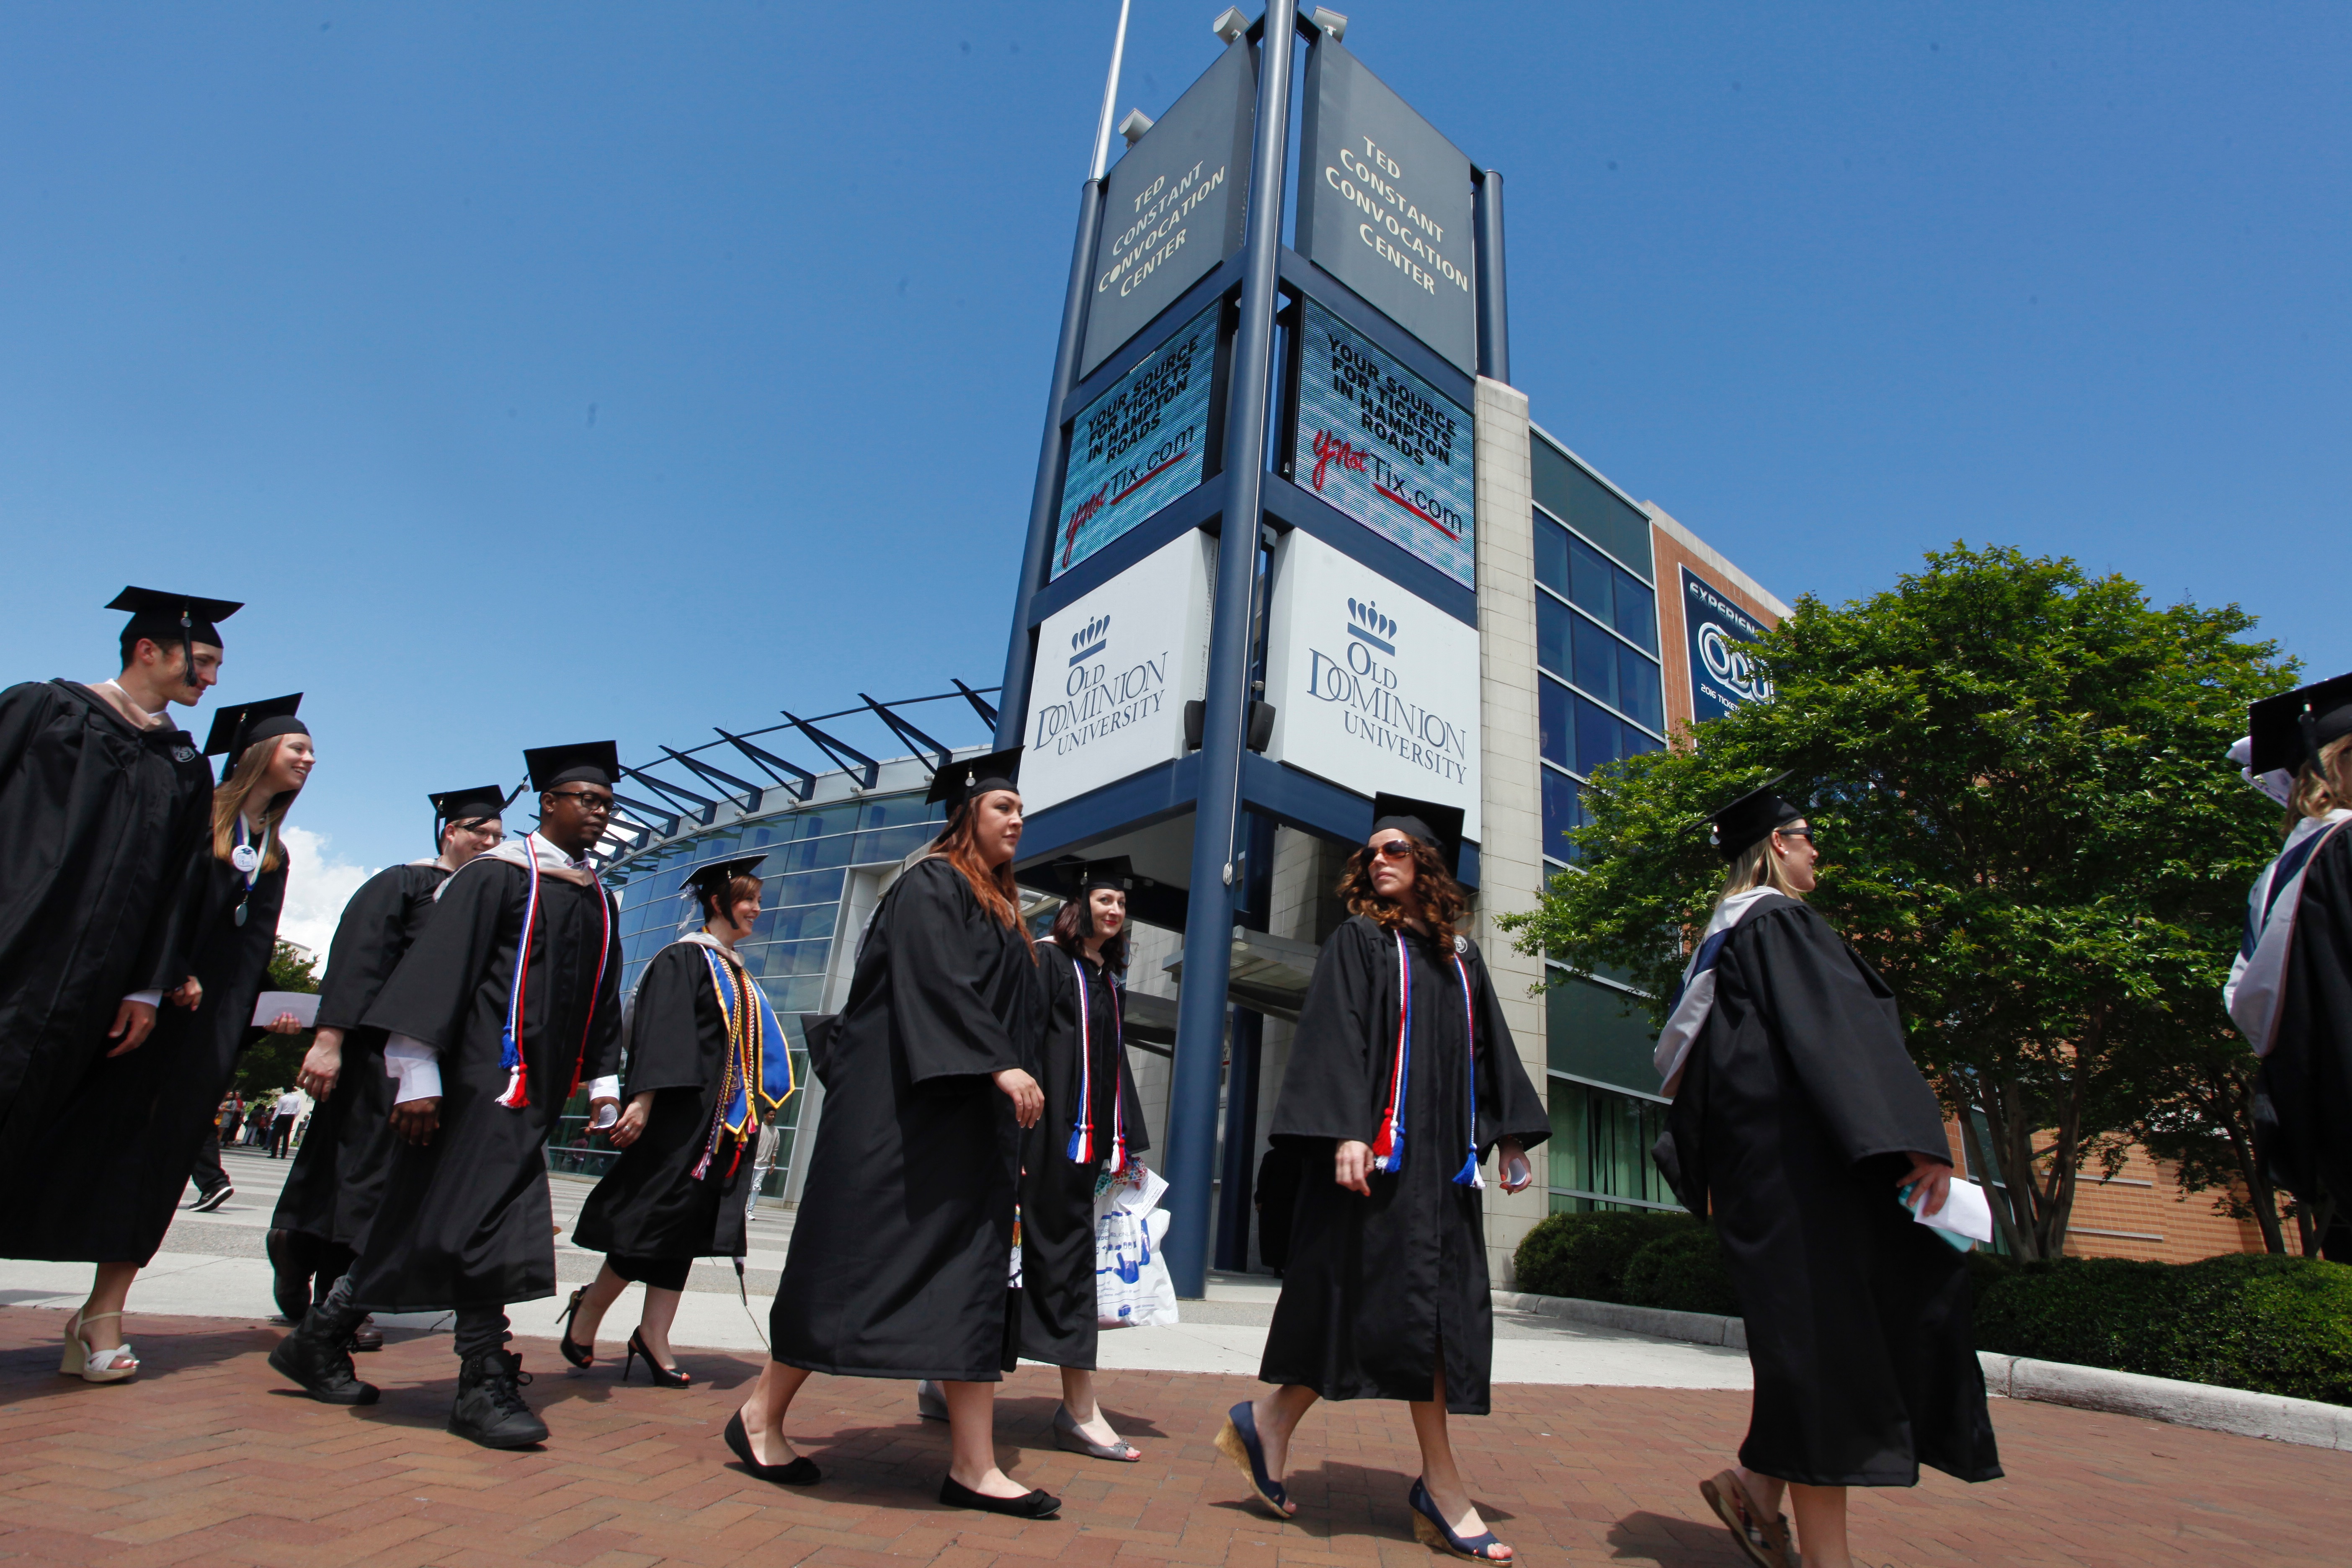 Old Dominion University Spring 2016 Commencement - 2 p.m. ceremony